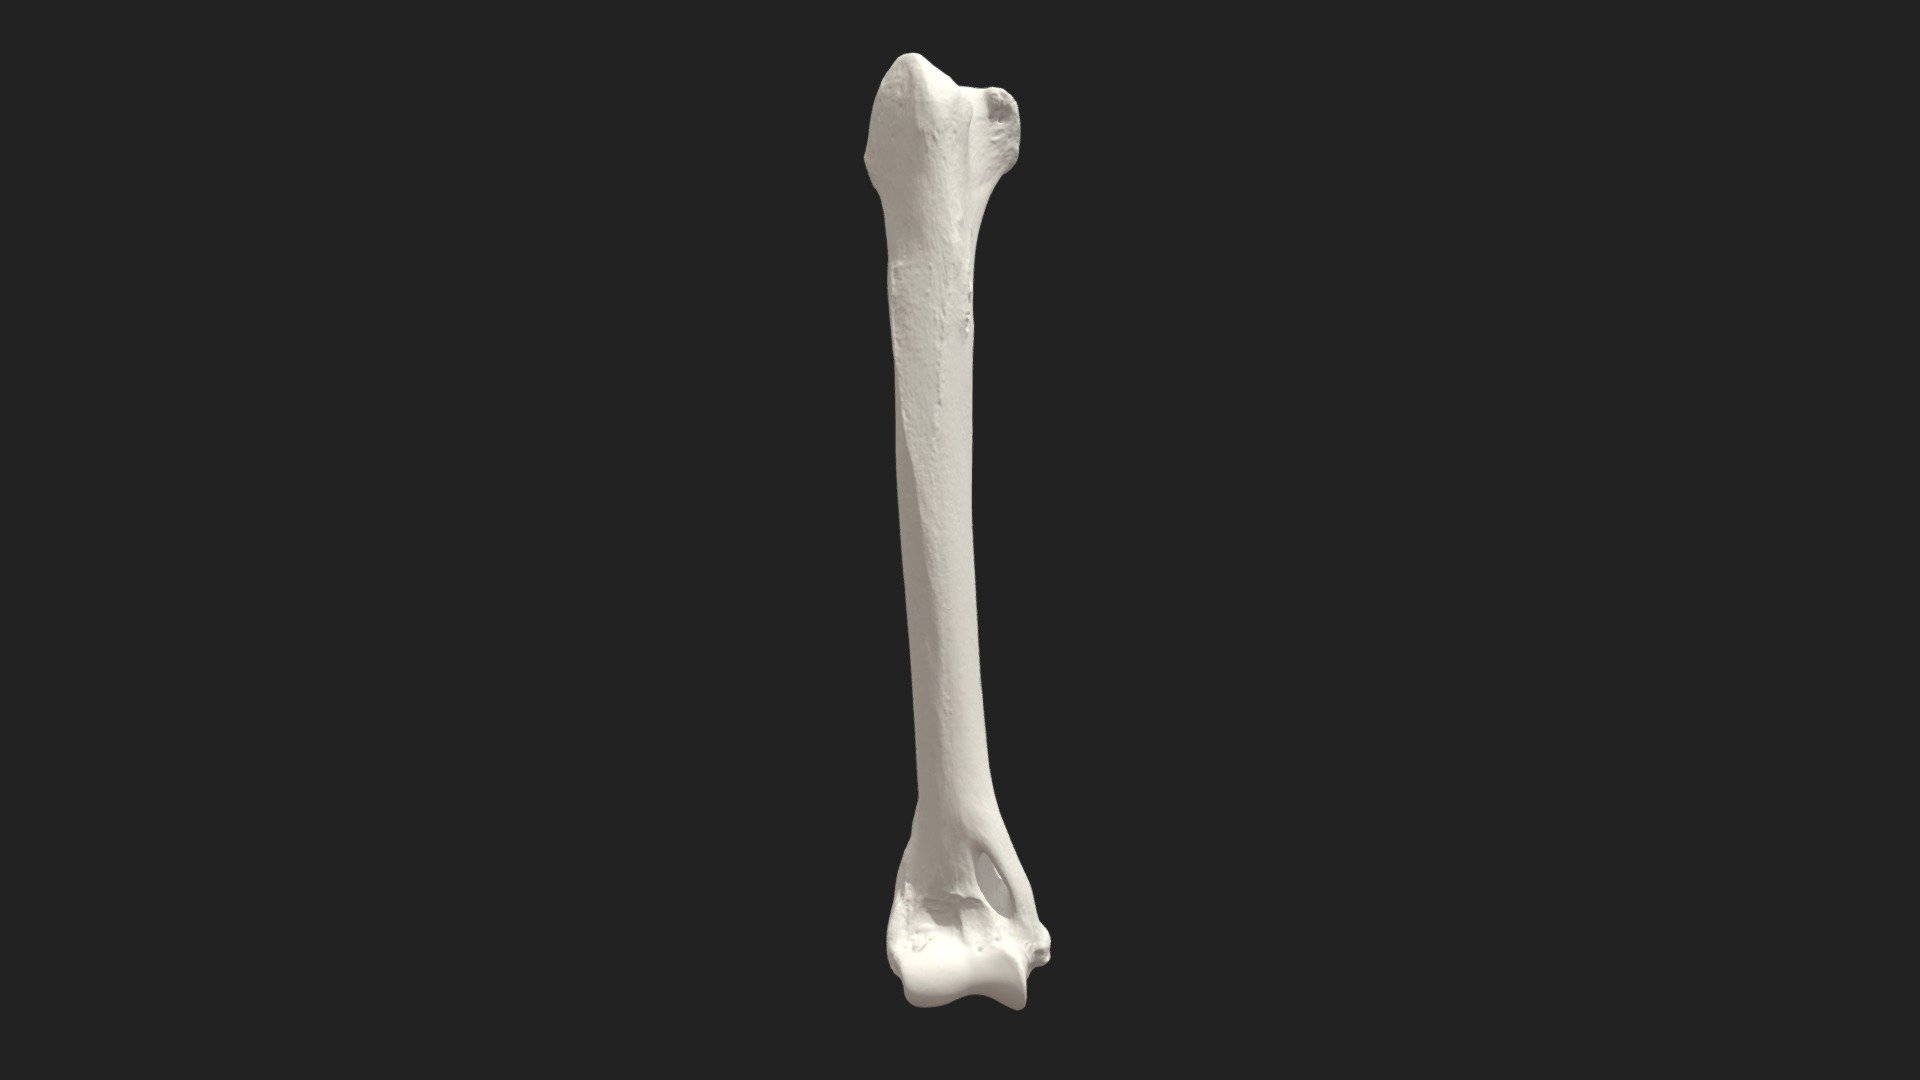 right brachial bone (humerus) of a cat

size of the specimen: 93 x 7 x 18 mm

3D scanning performed with the structured light scanner “Artec Micro” - brachial bone (humerus) cat - 3D model by vetanatMunich 3d model